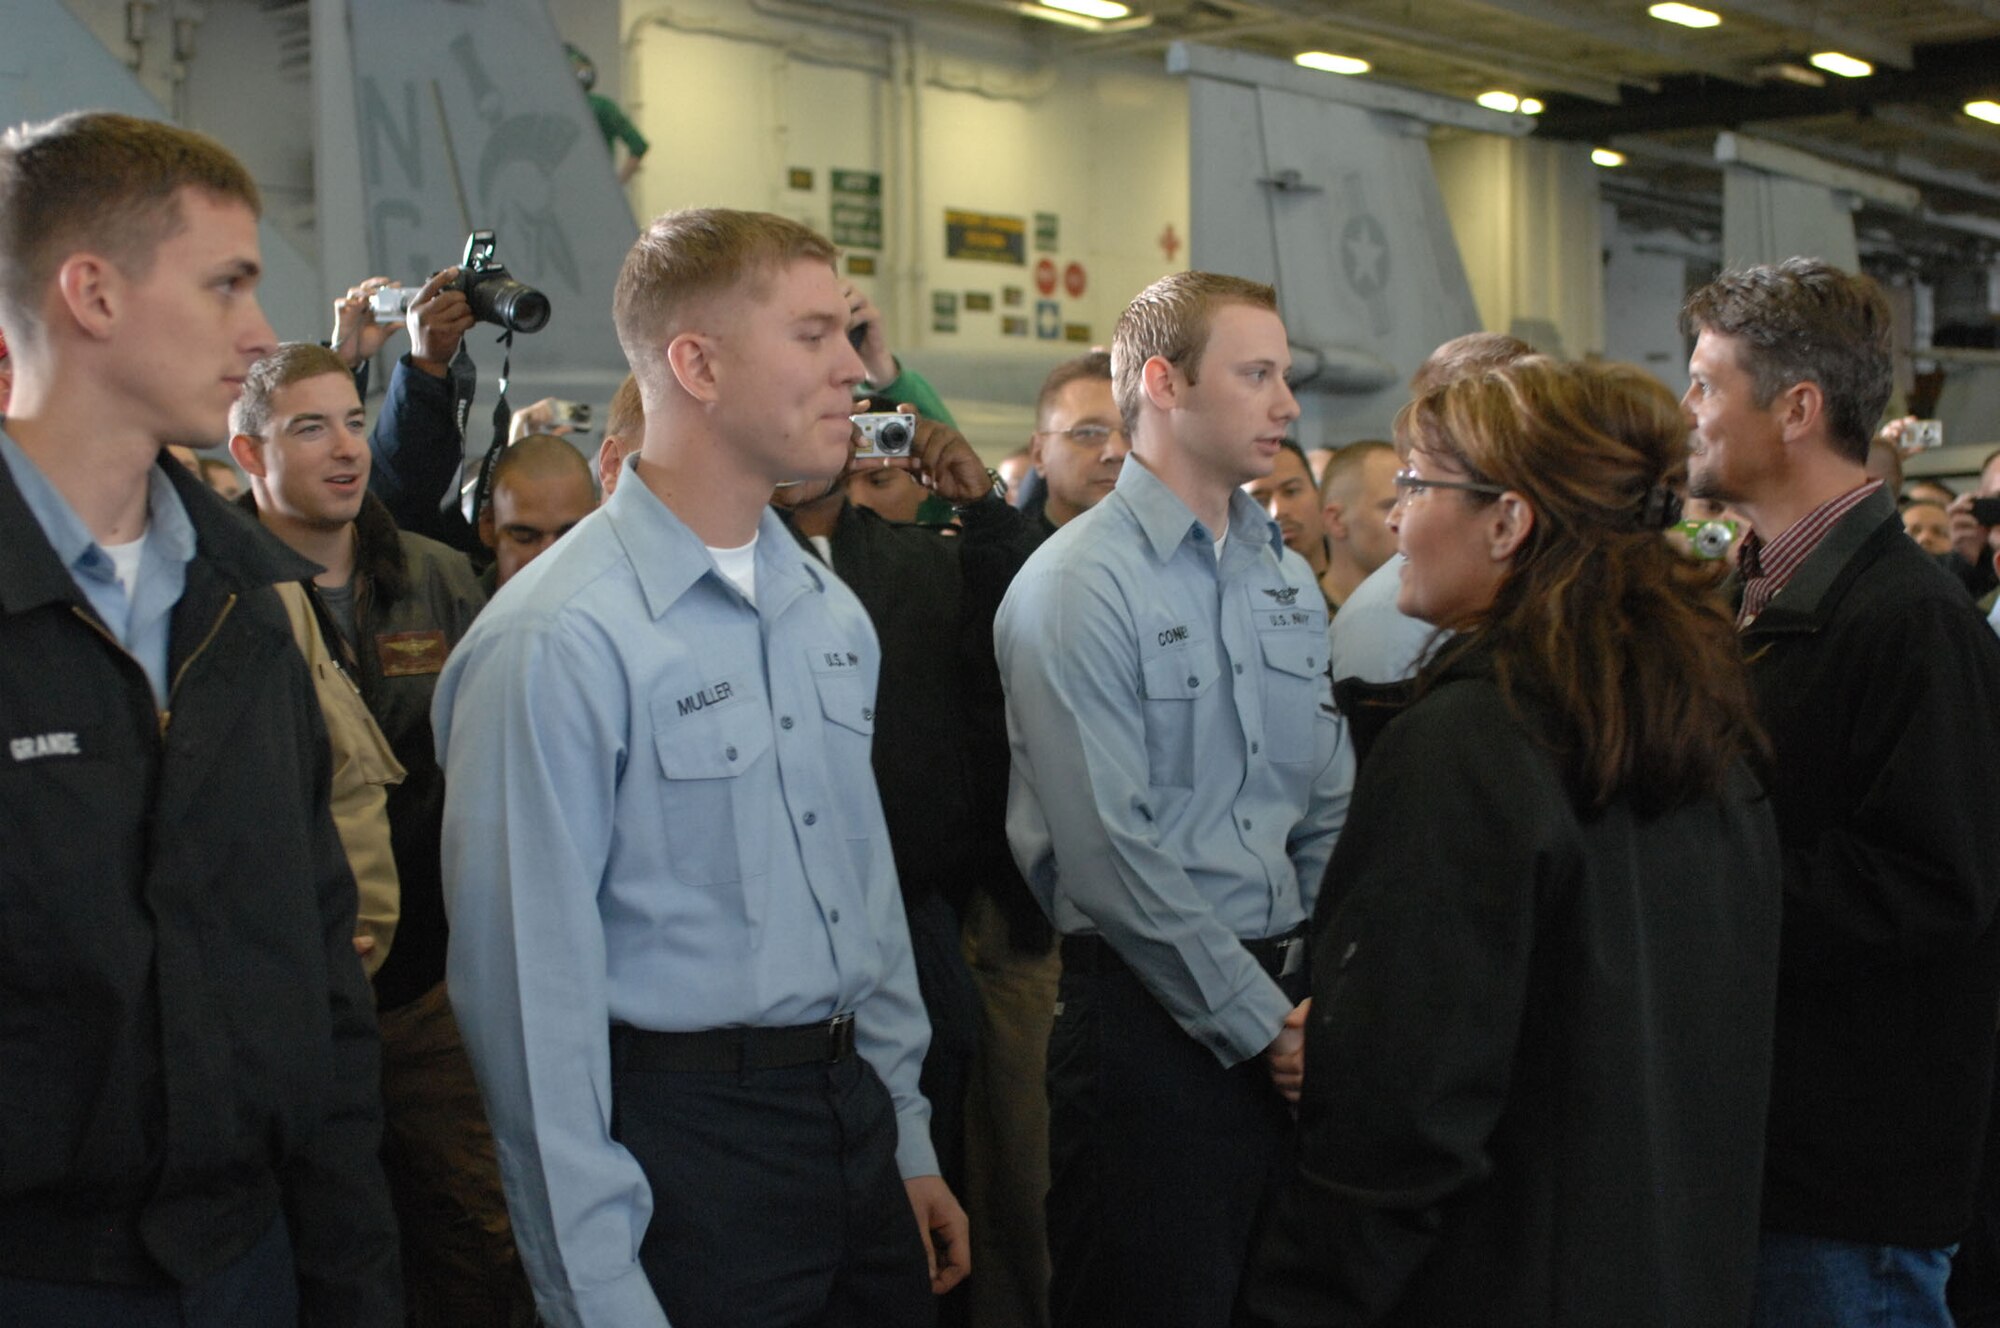 Alaskan Governor Sarah Palin greets Alaskan constituents inside the hanger bay of the aircraft carrier USS John C. Stennis (CVN 74) on Monday during the military joint-training exercise Northern Edge 2009 (Photo by Army Sgt. Ricardo Branch, Northern Edge Joint Information Bureau).